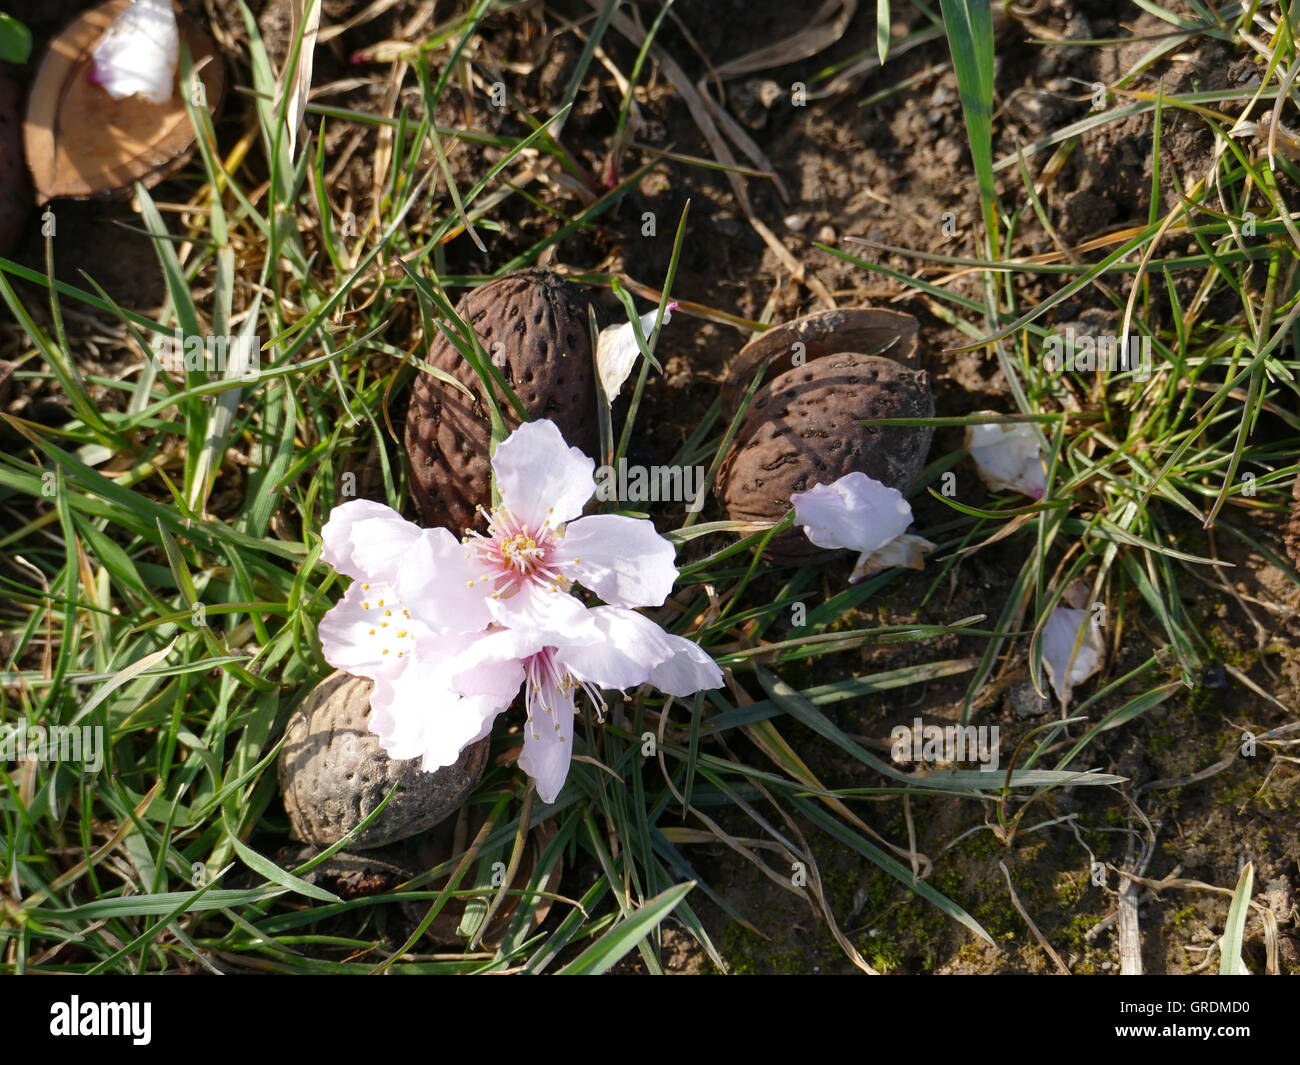 Almonds From Autumn Of The Previous Year And New Almond Blossoms Lying On The Soil Stock Photo